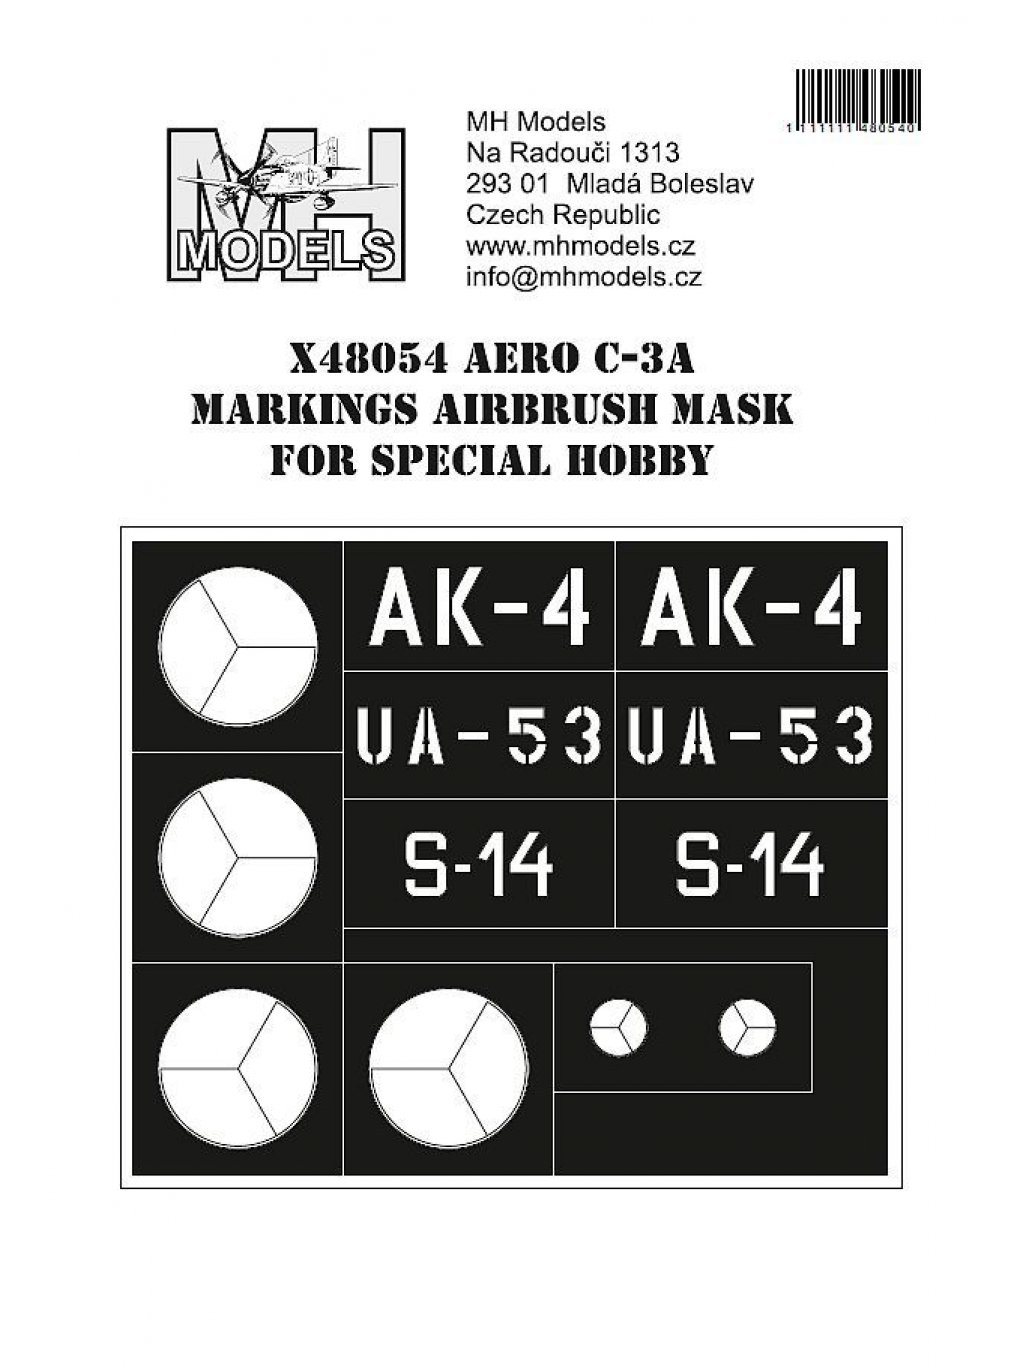 Aero C-3A Markings airbrush mask for Special Hobby